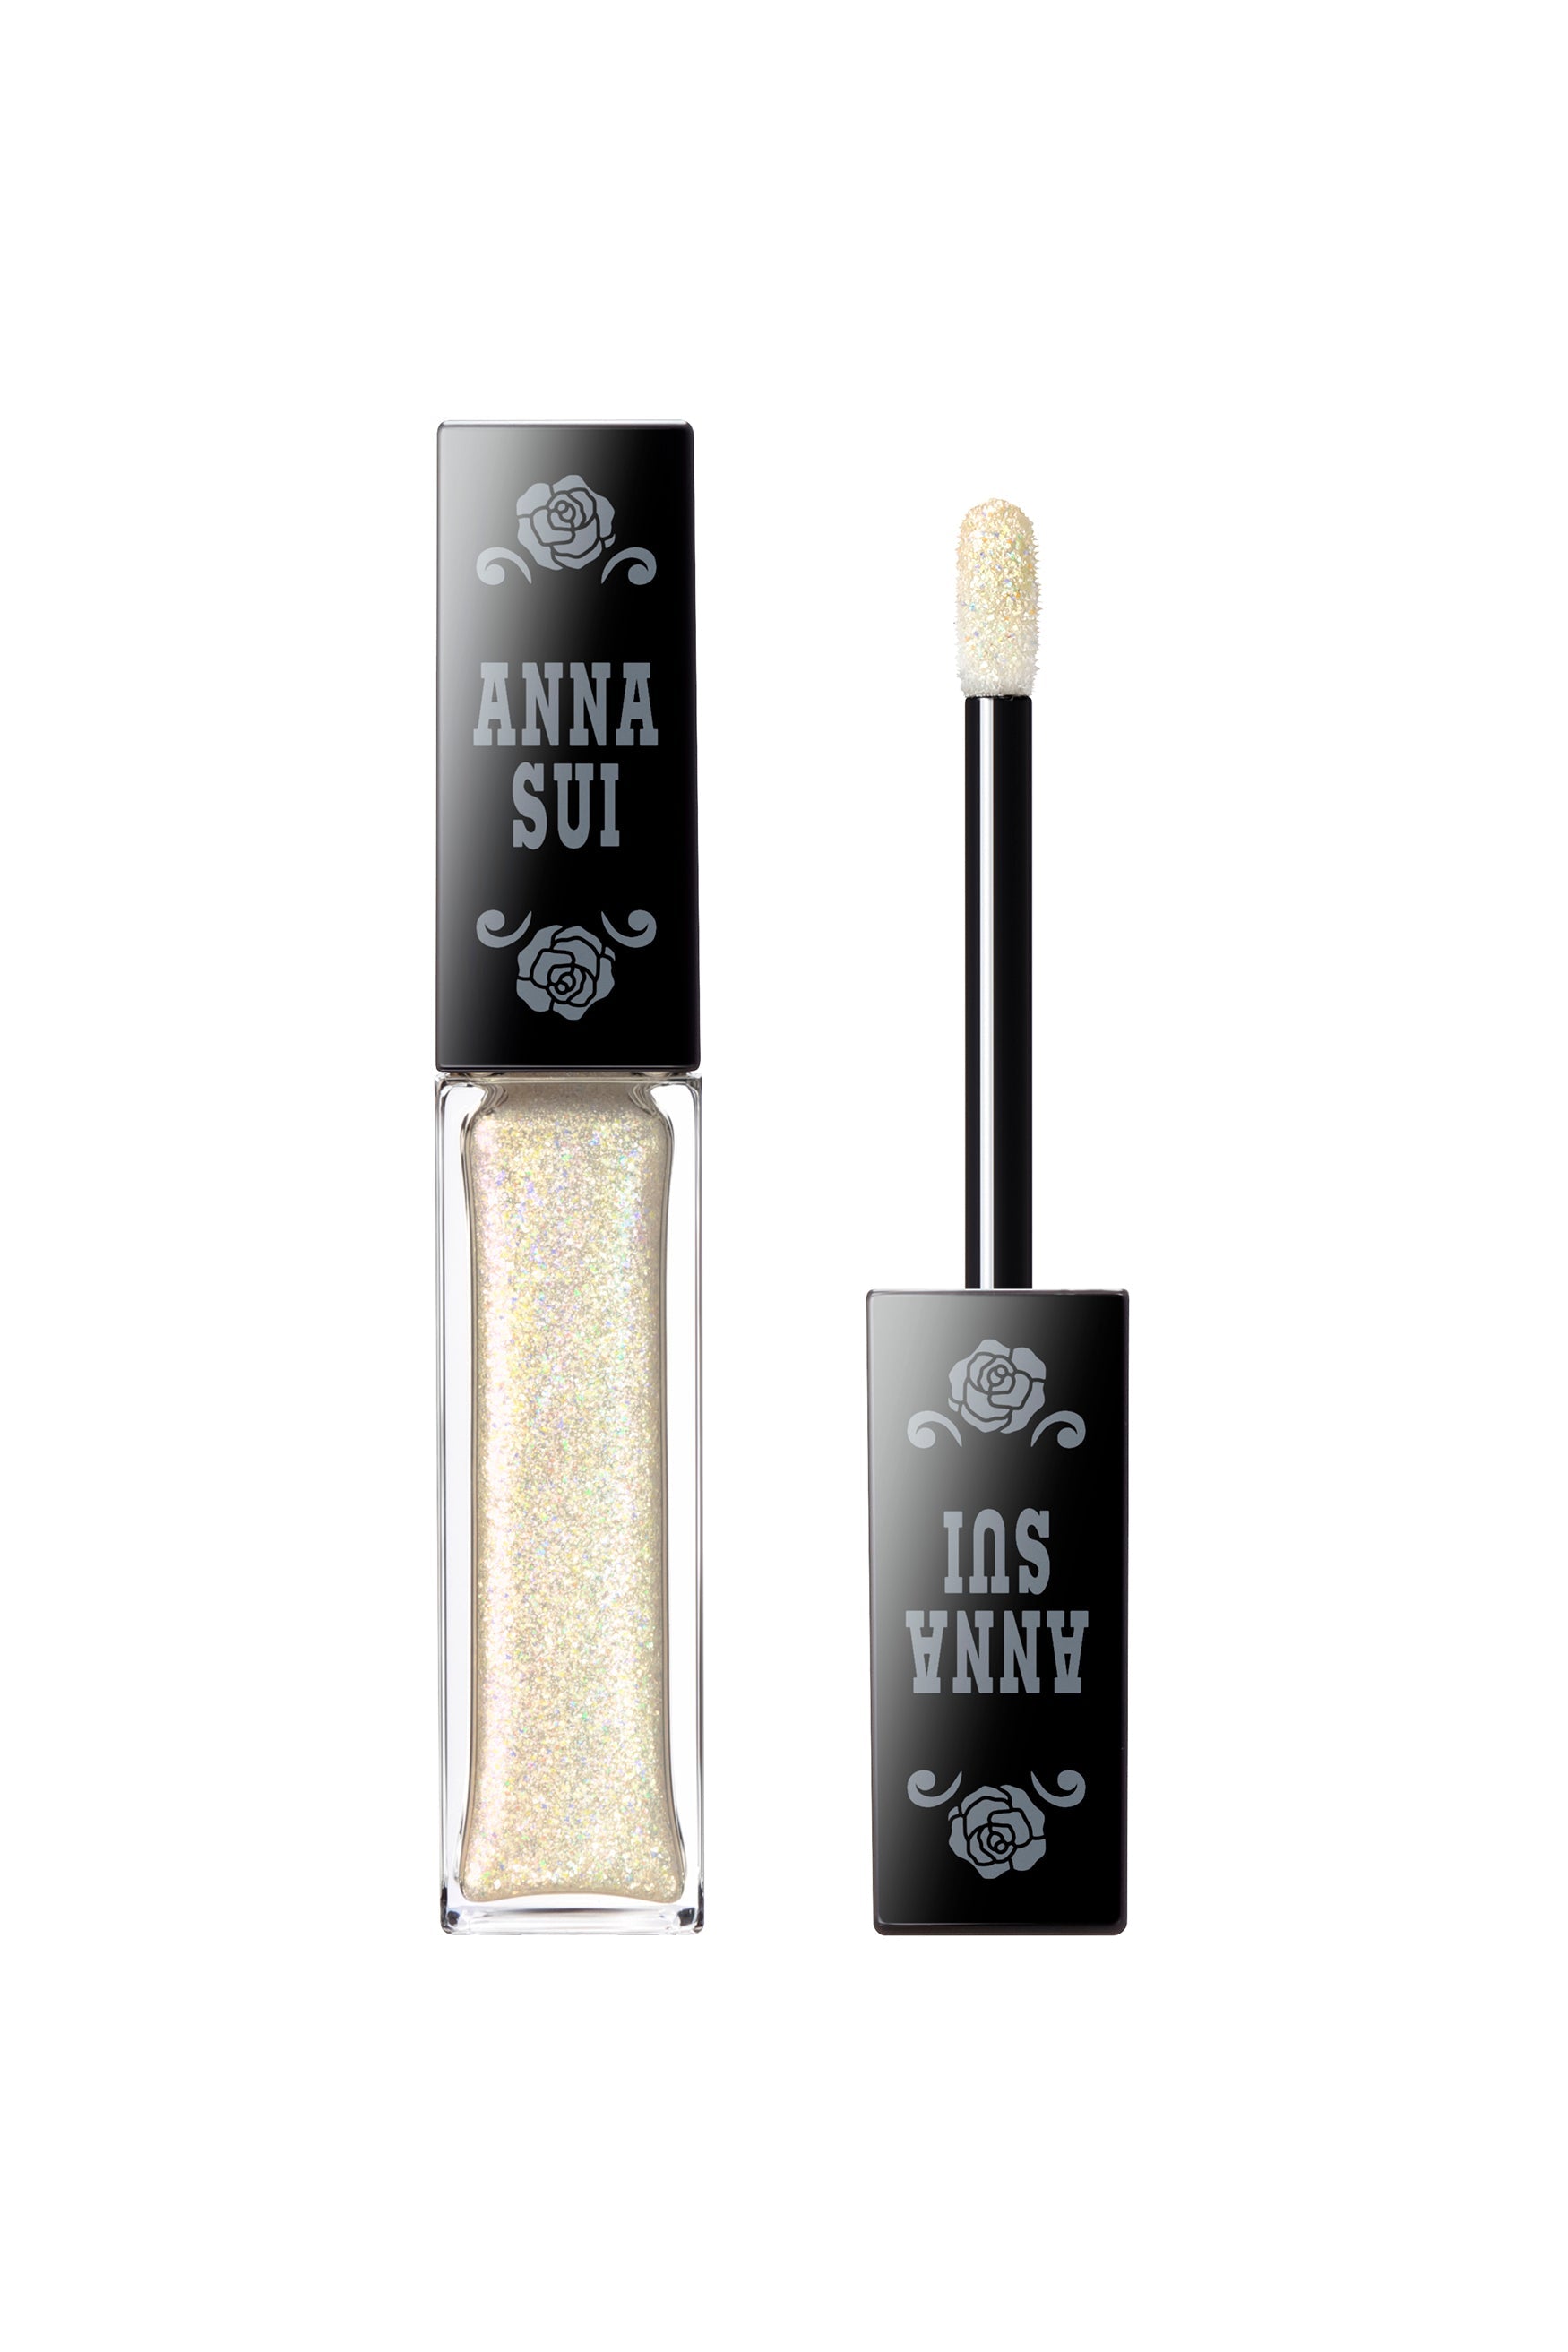 PEARLESCENT WHITE, transparent bottle & applicator with Anna Sui label on the black top